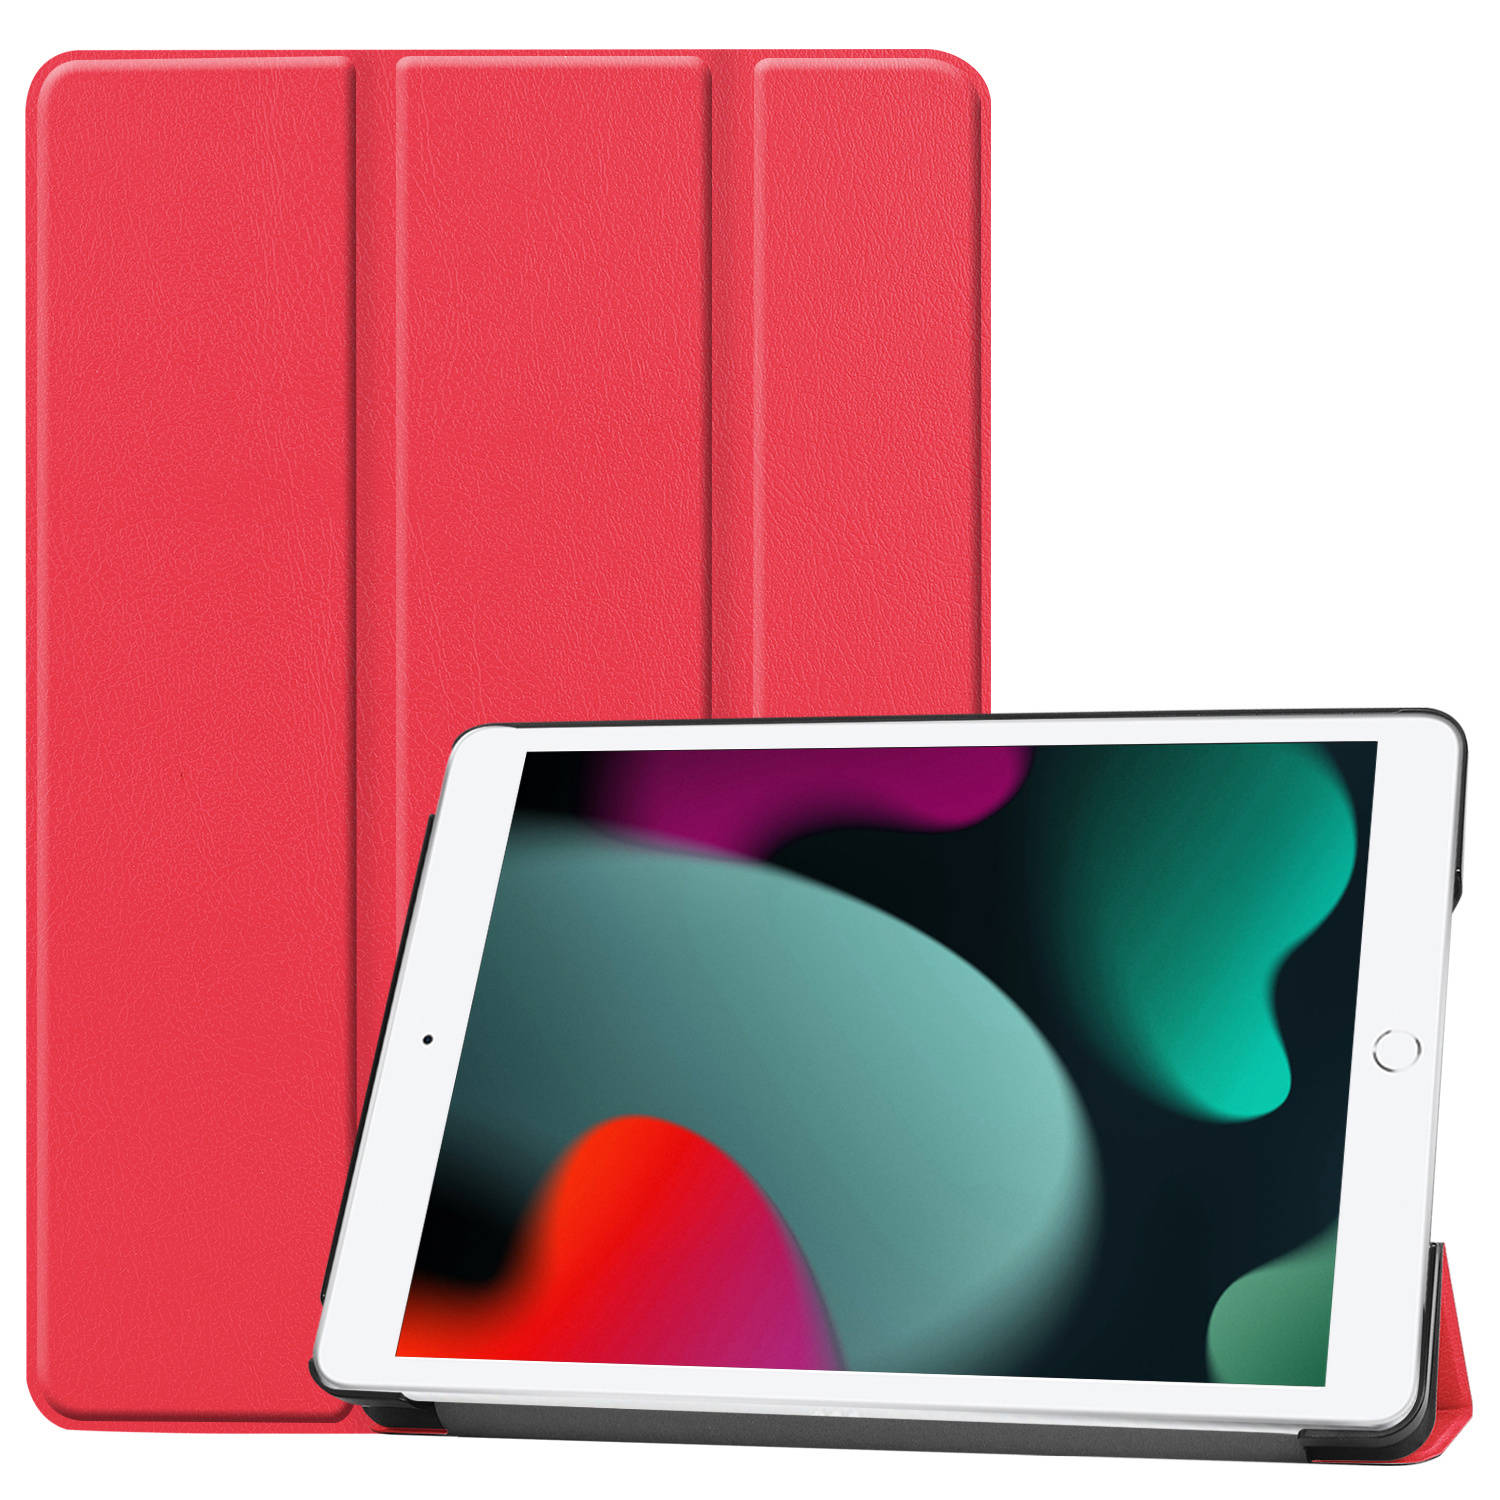 Basey iPad 10.2 2020 Hoes Book Case Hoesje - iPad 10.2 2020 Hoesje Hard Cover Case Hoes - Rood